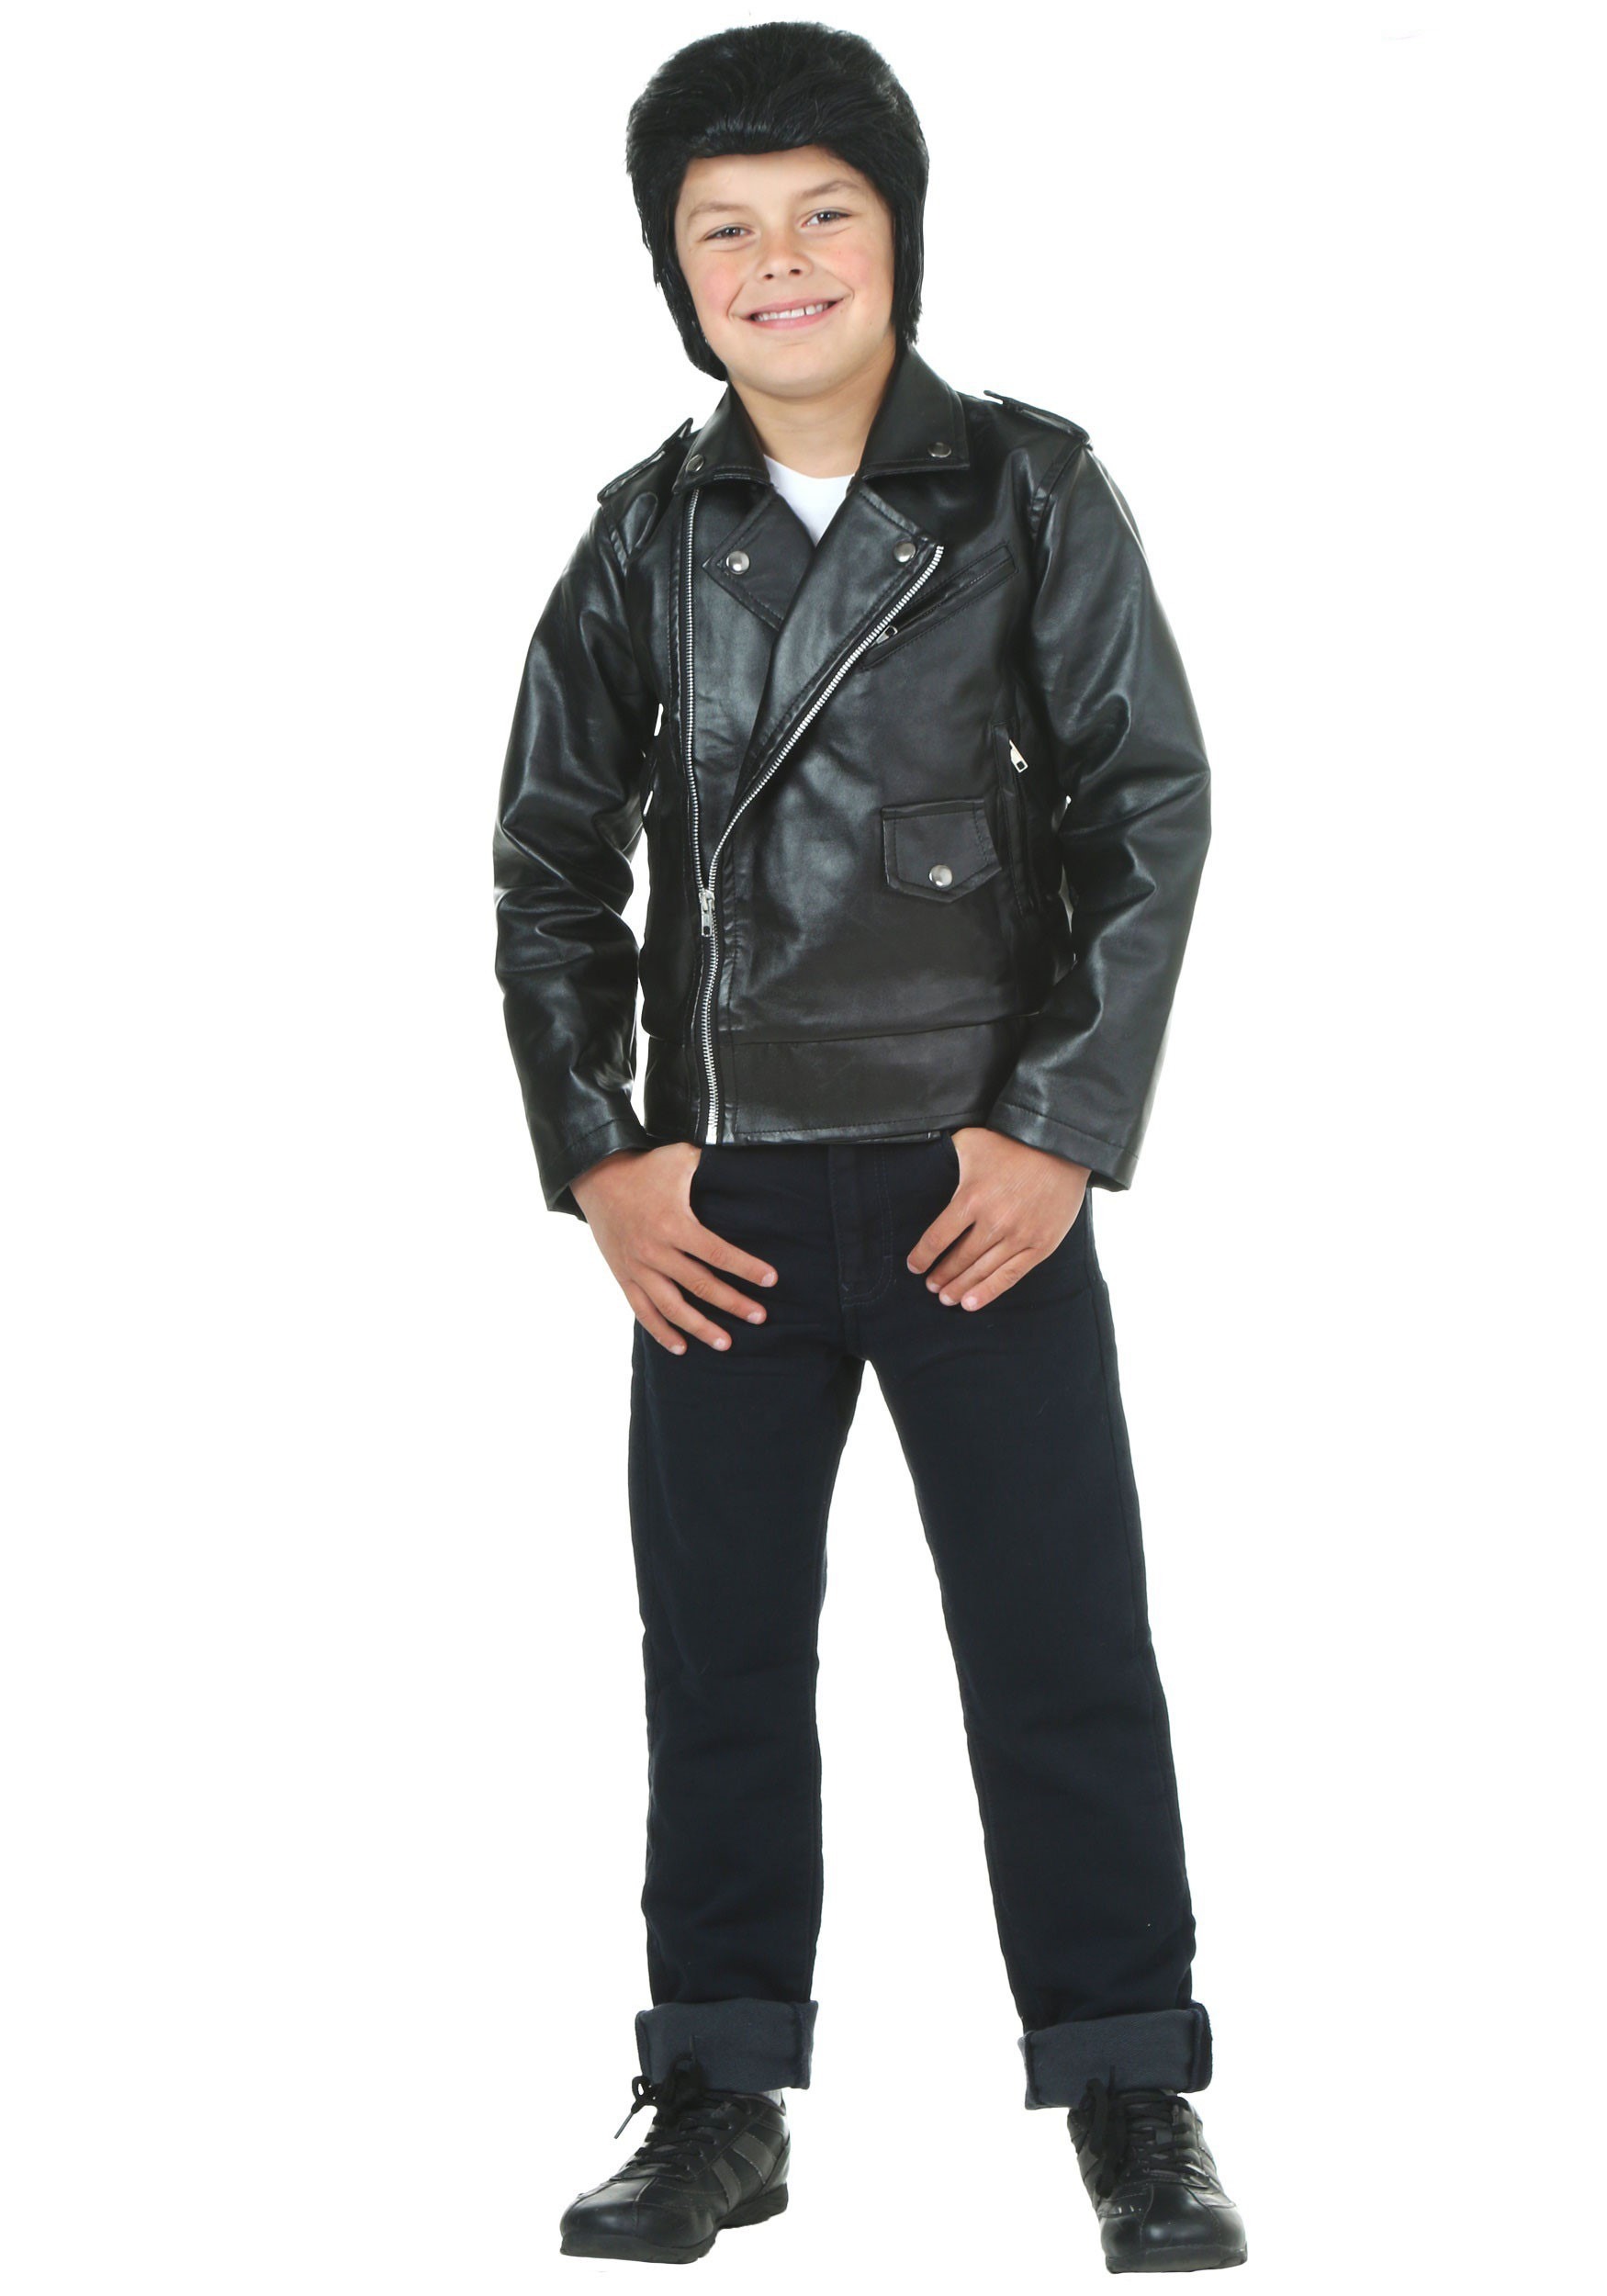 Photos - Fancy Dress FUN Costumes Child Authentic T-Birds Costume Jacket | Grease Costumes Blac